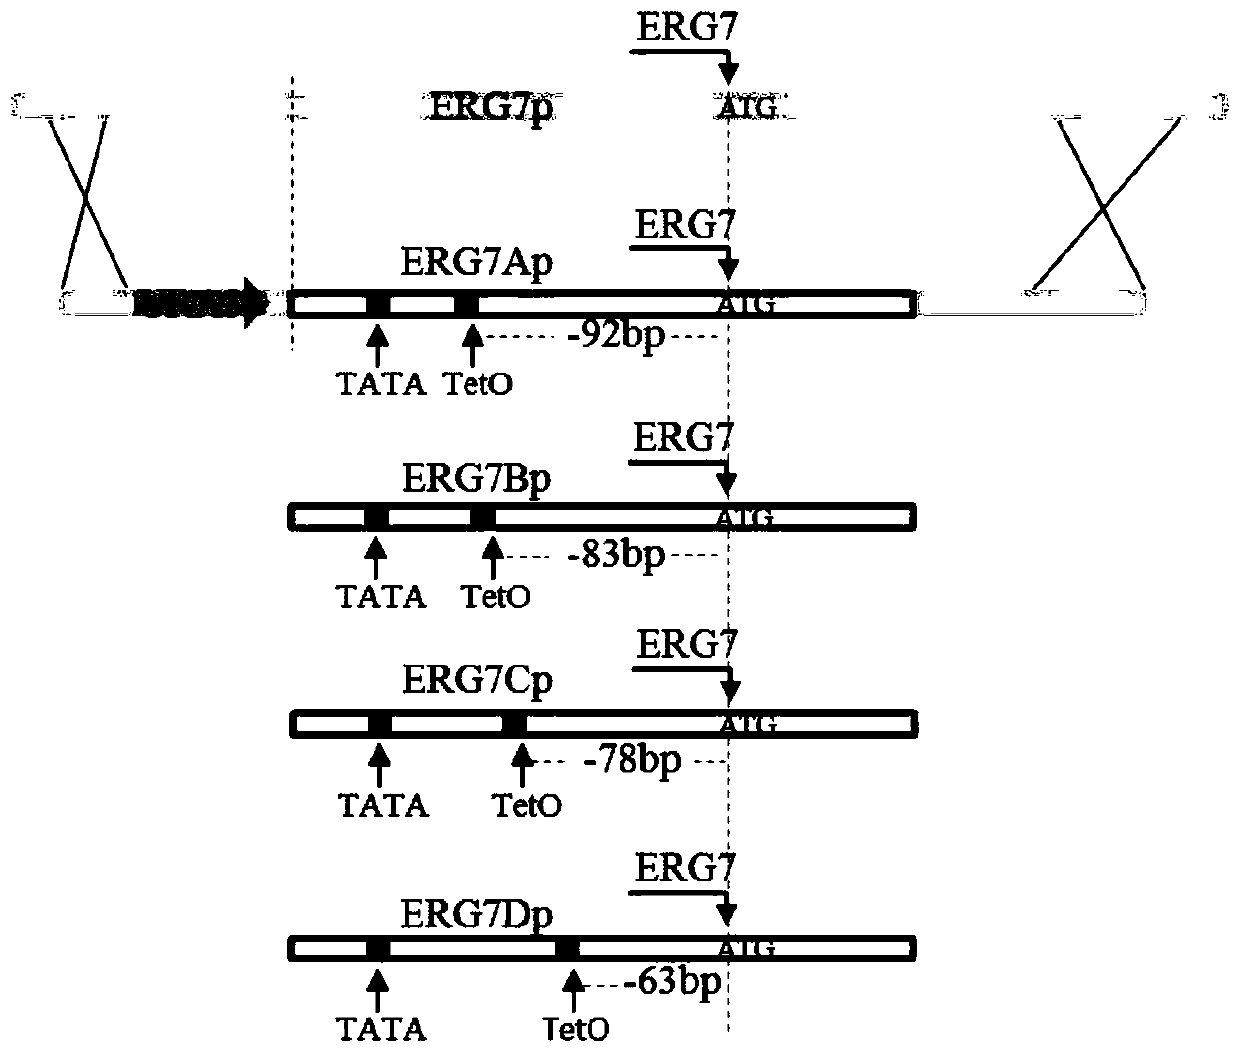 Recombinant bacteria for fine regulation and control of saccharomyces cerevisiae ERG7 expression and construction method thereof